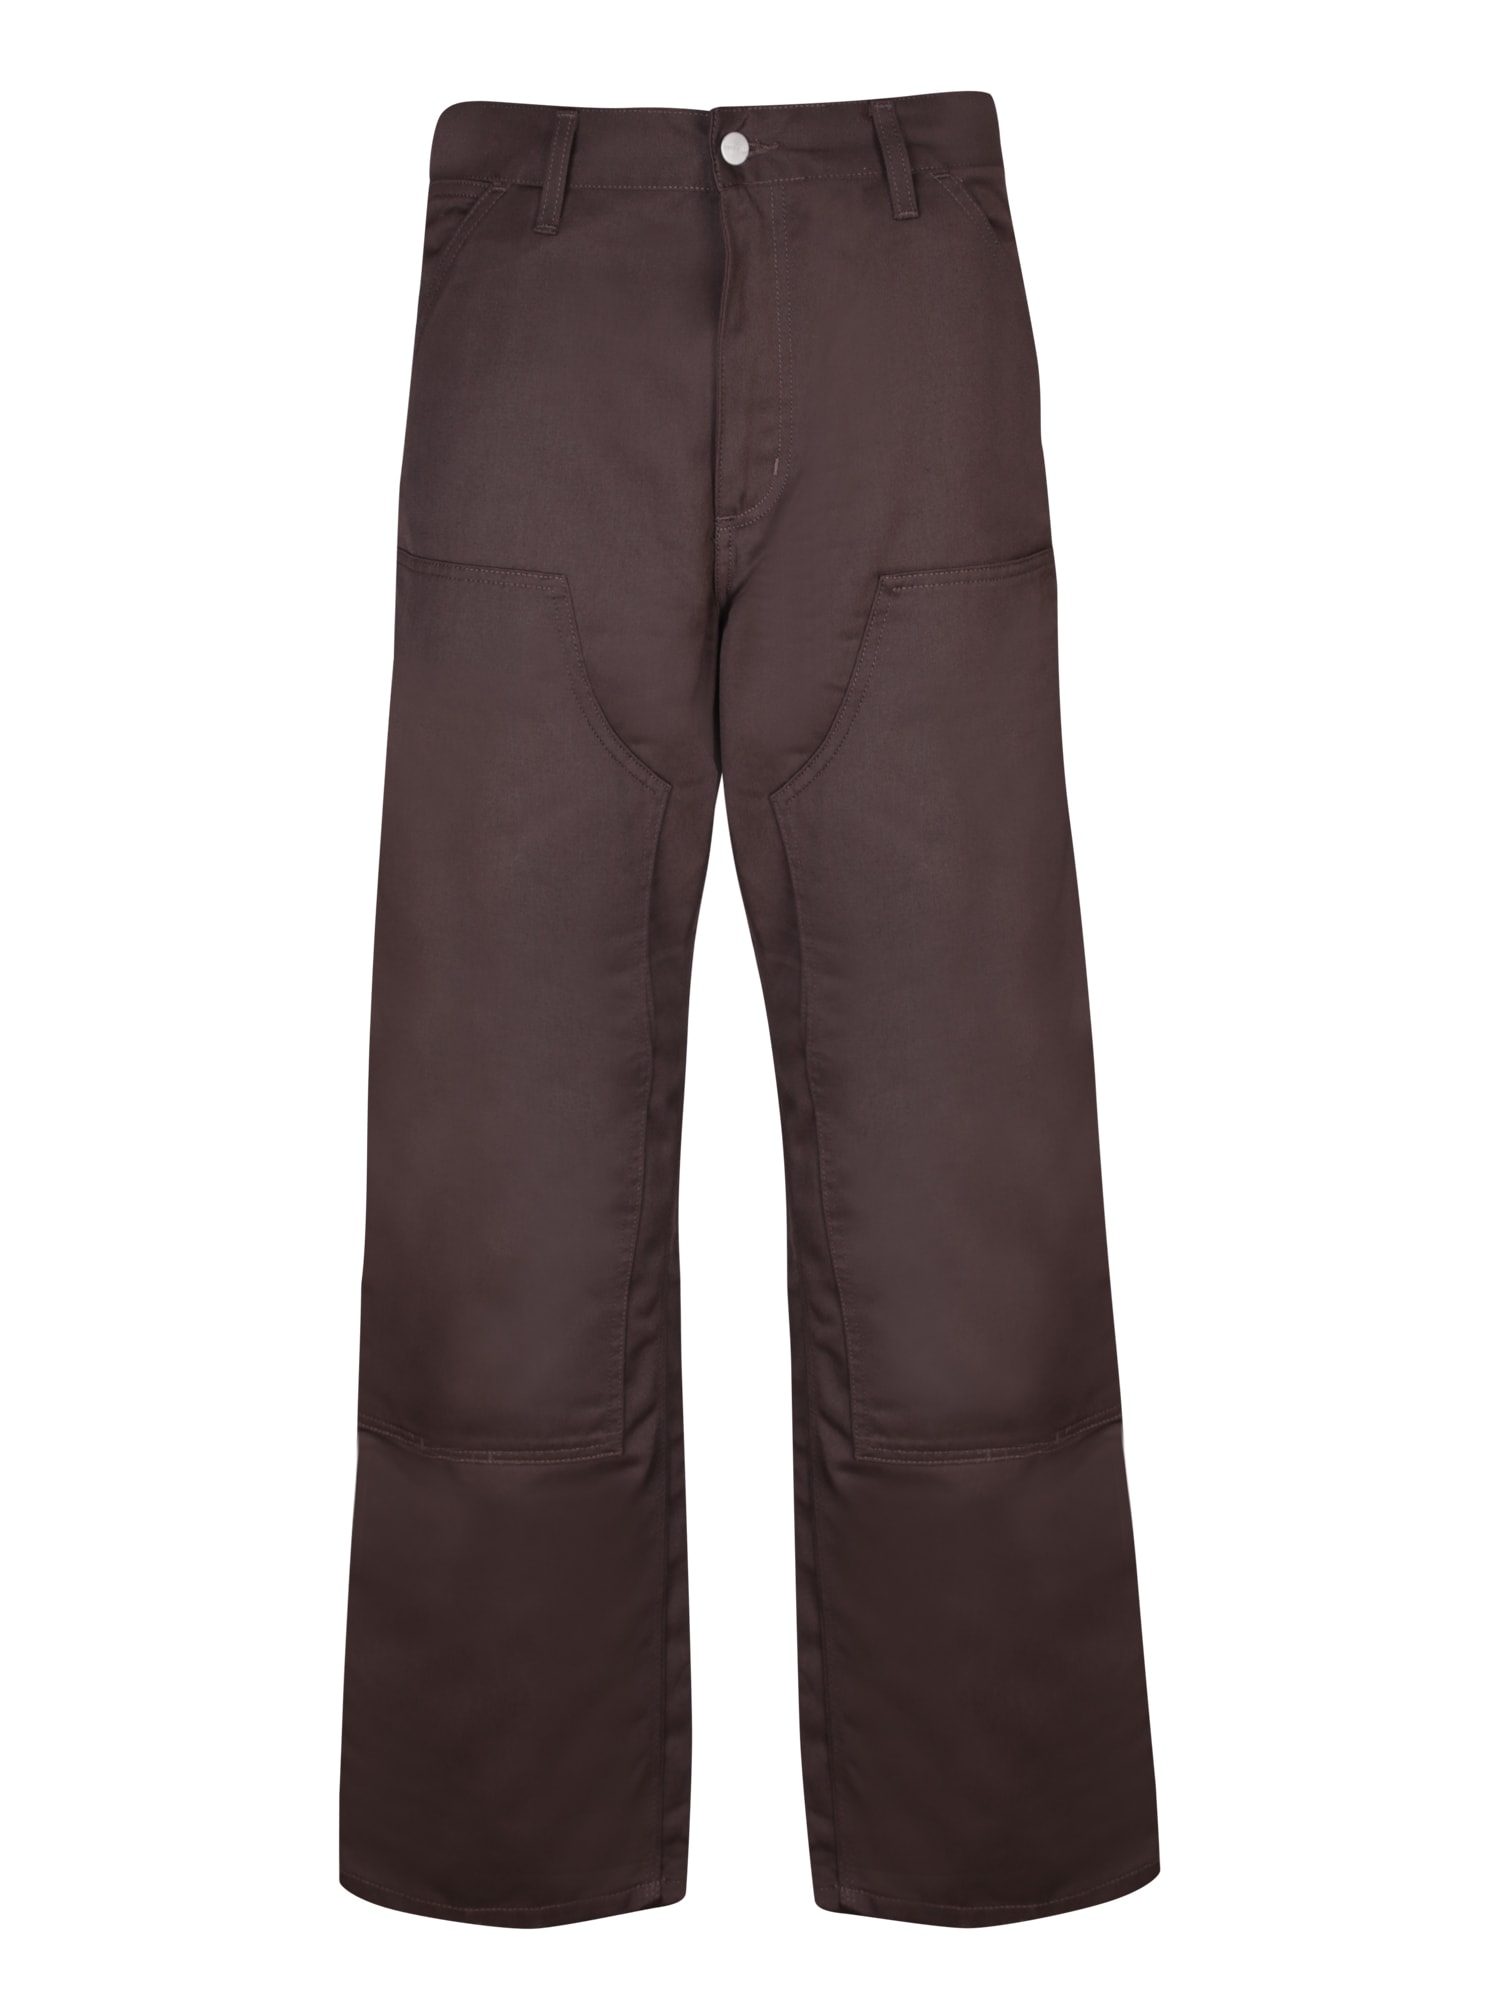 Shop Carhartt Double Knee Brown Trousers